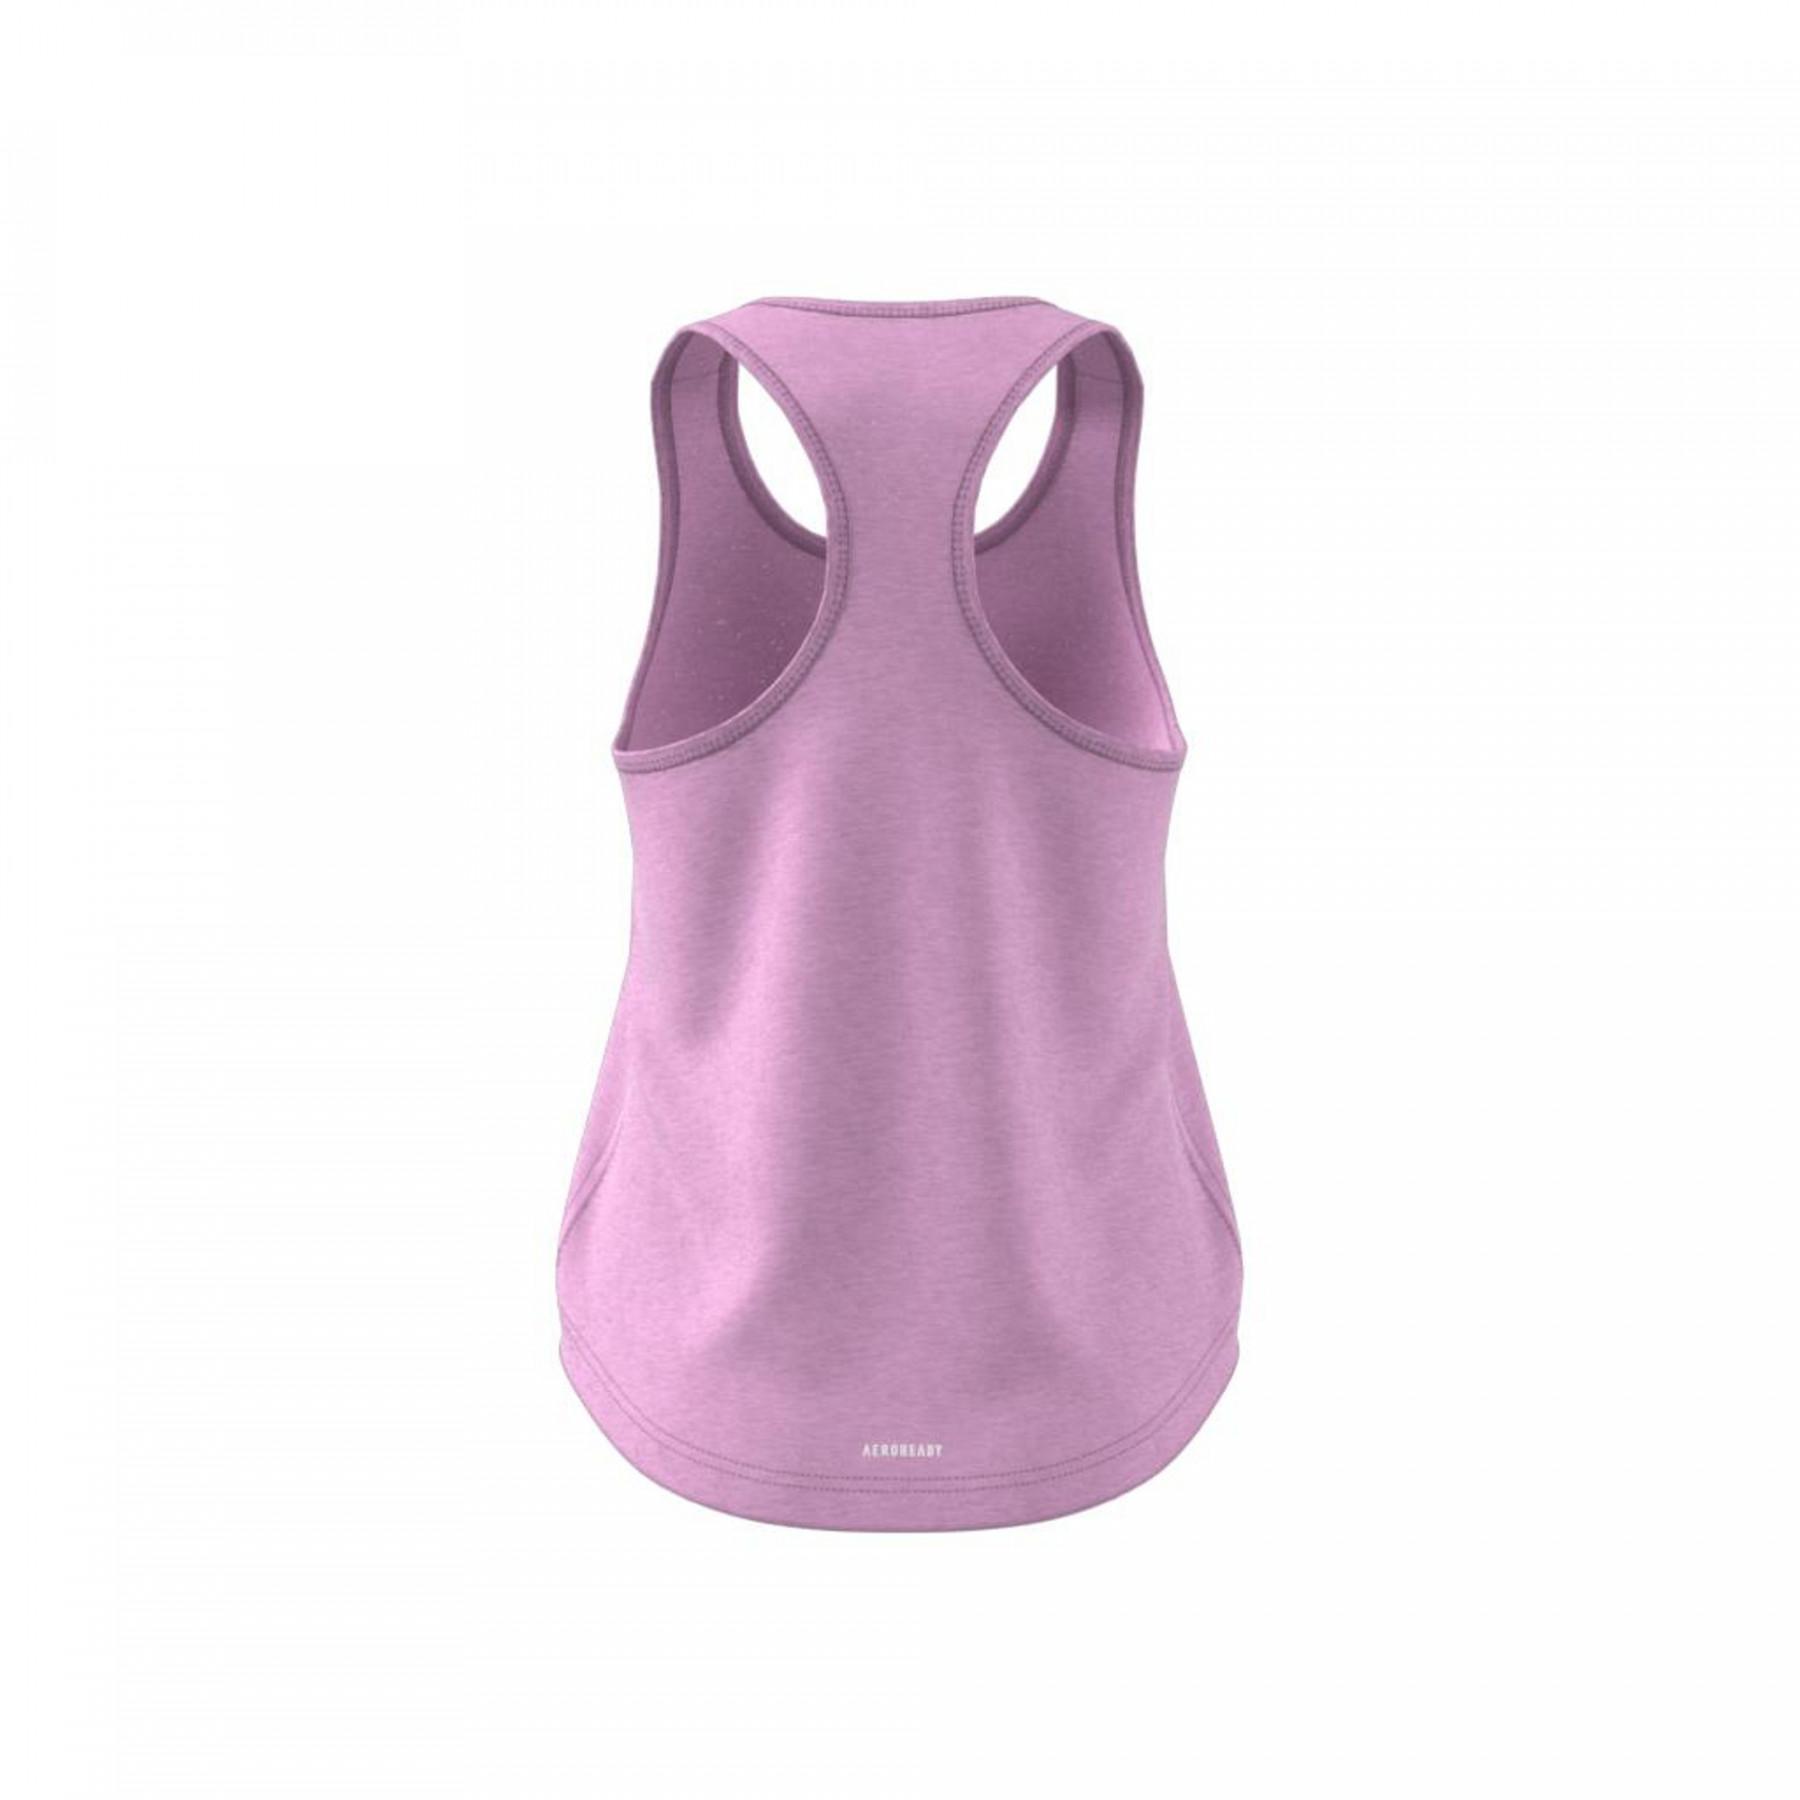 Women's tank top adidas Designed To Move DANCE